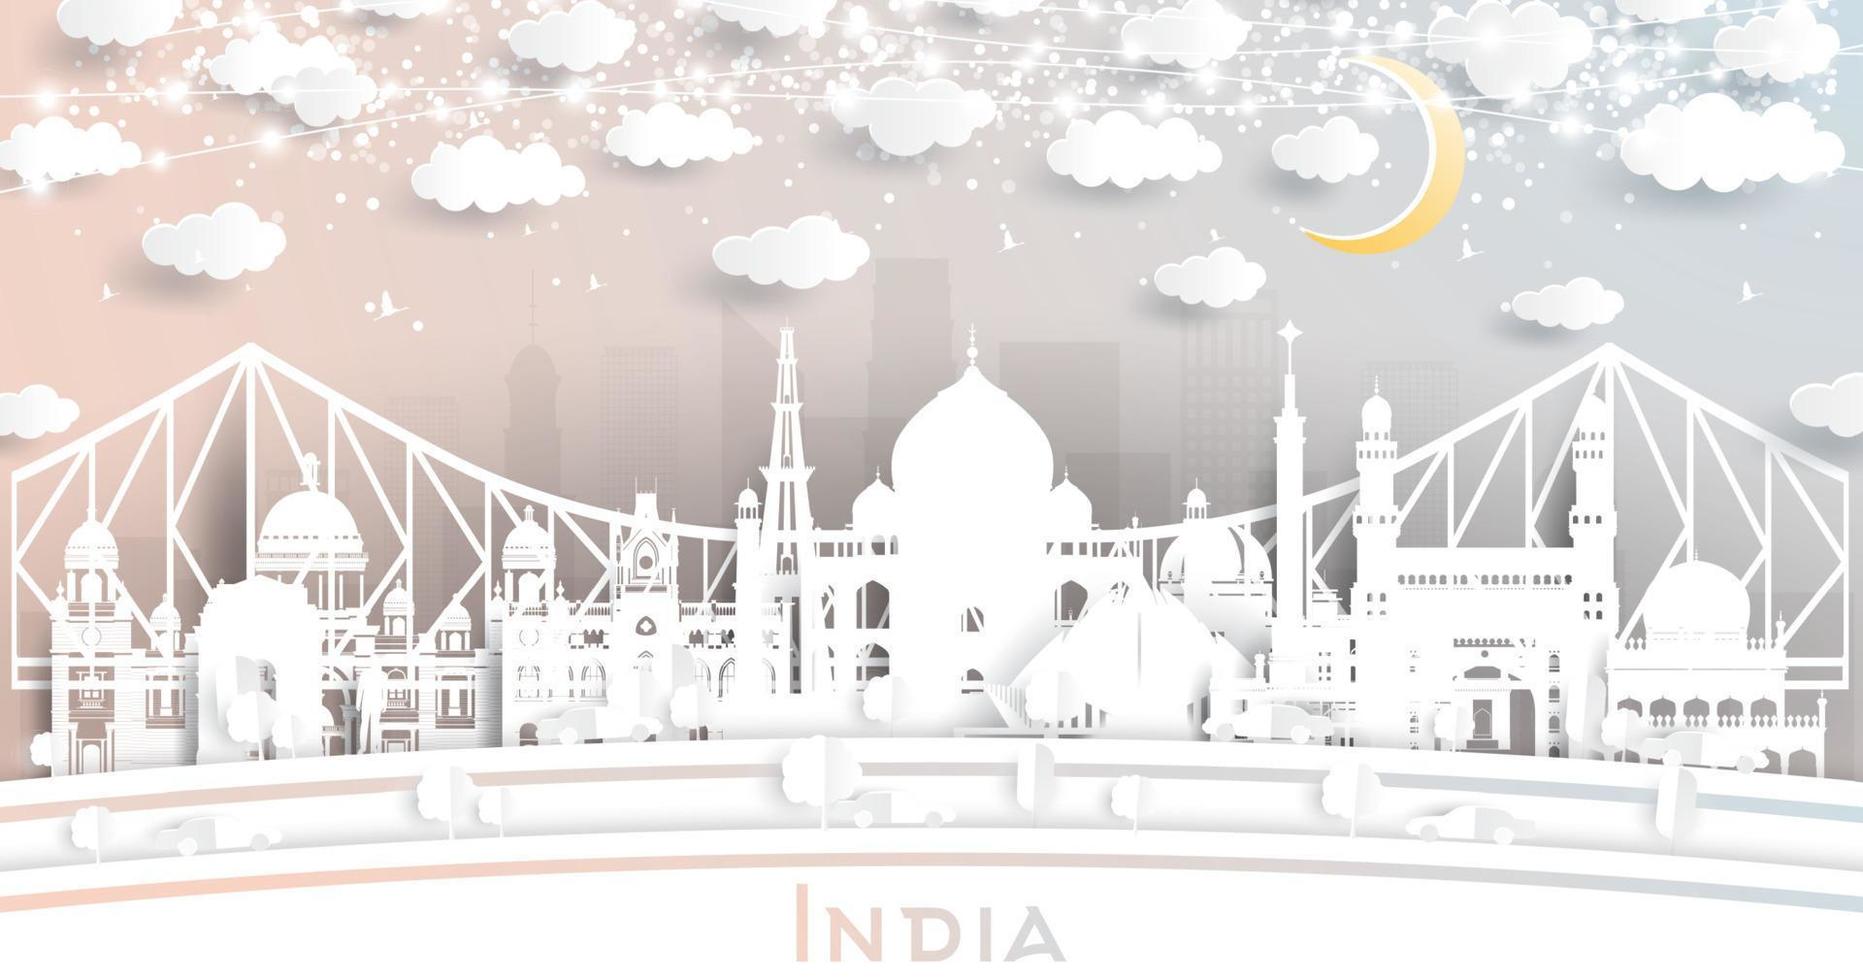 India City Skyline in Paper Cut Style with White Buildings, Moon and Neon Garland. vector